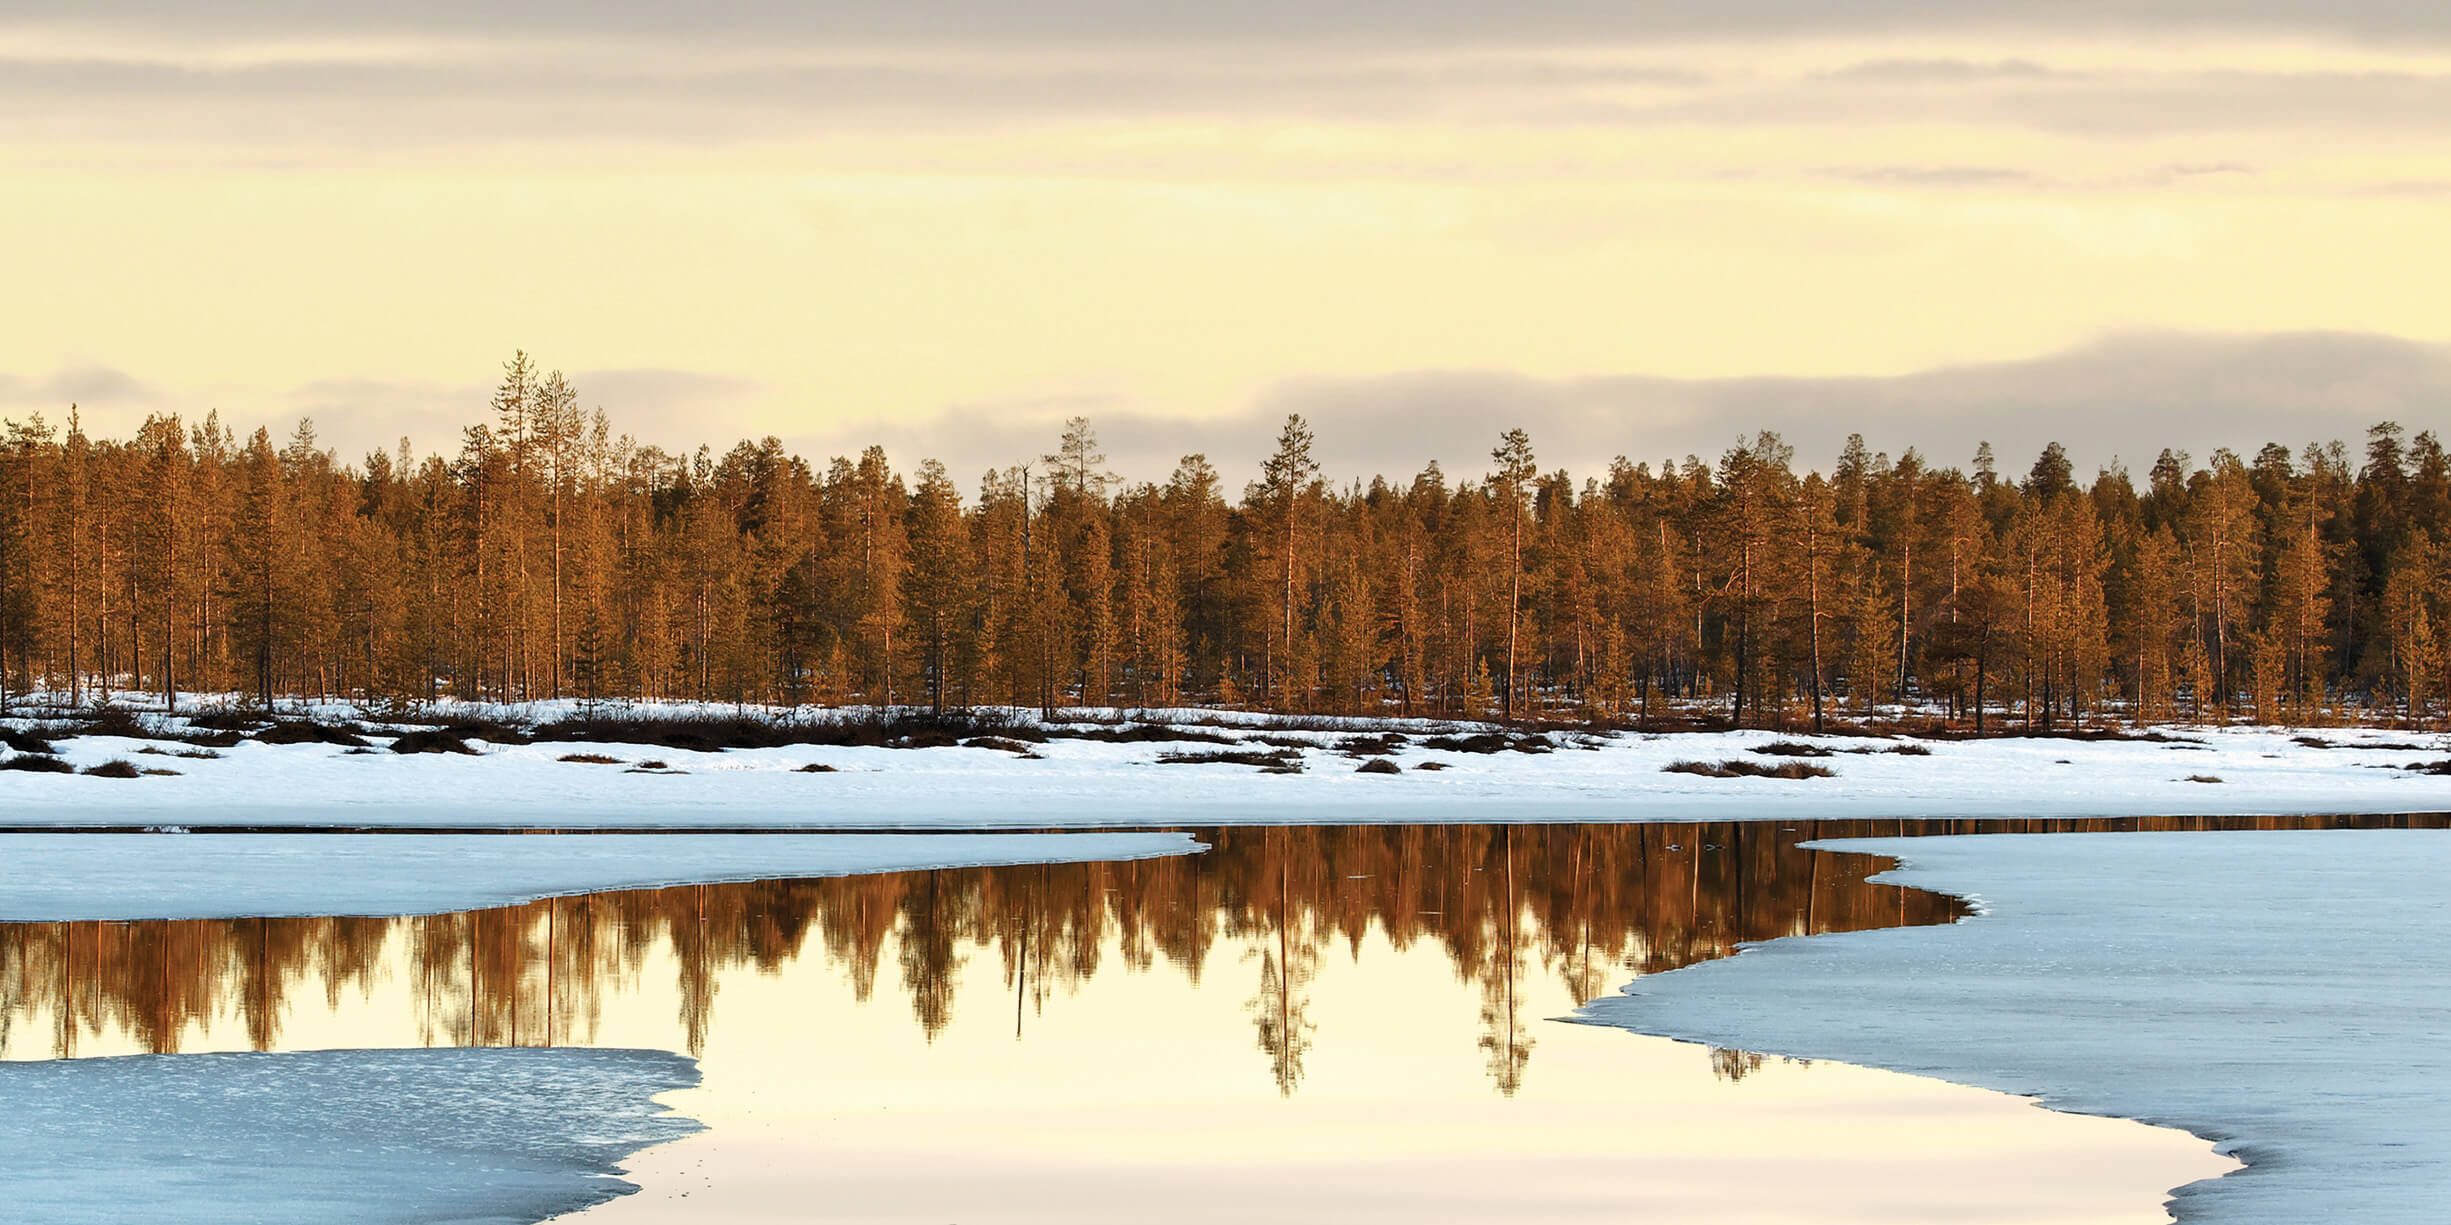 A line of trees reflect golden light behind a lake with melting ice and snow